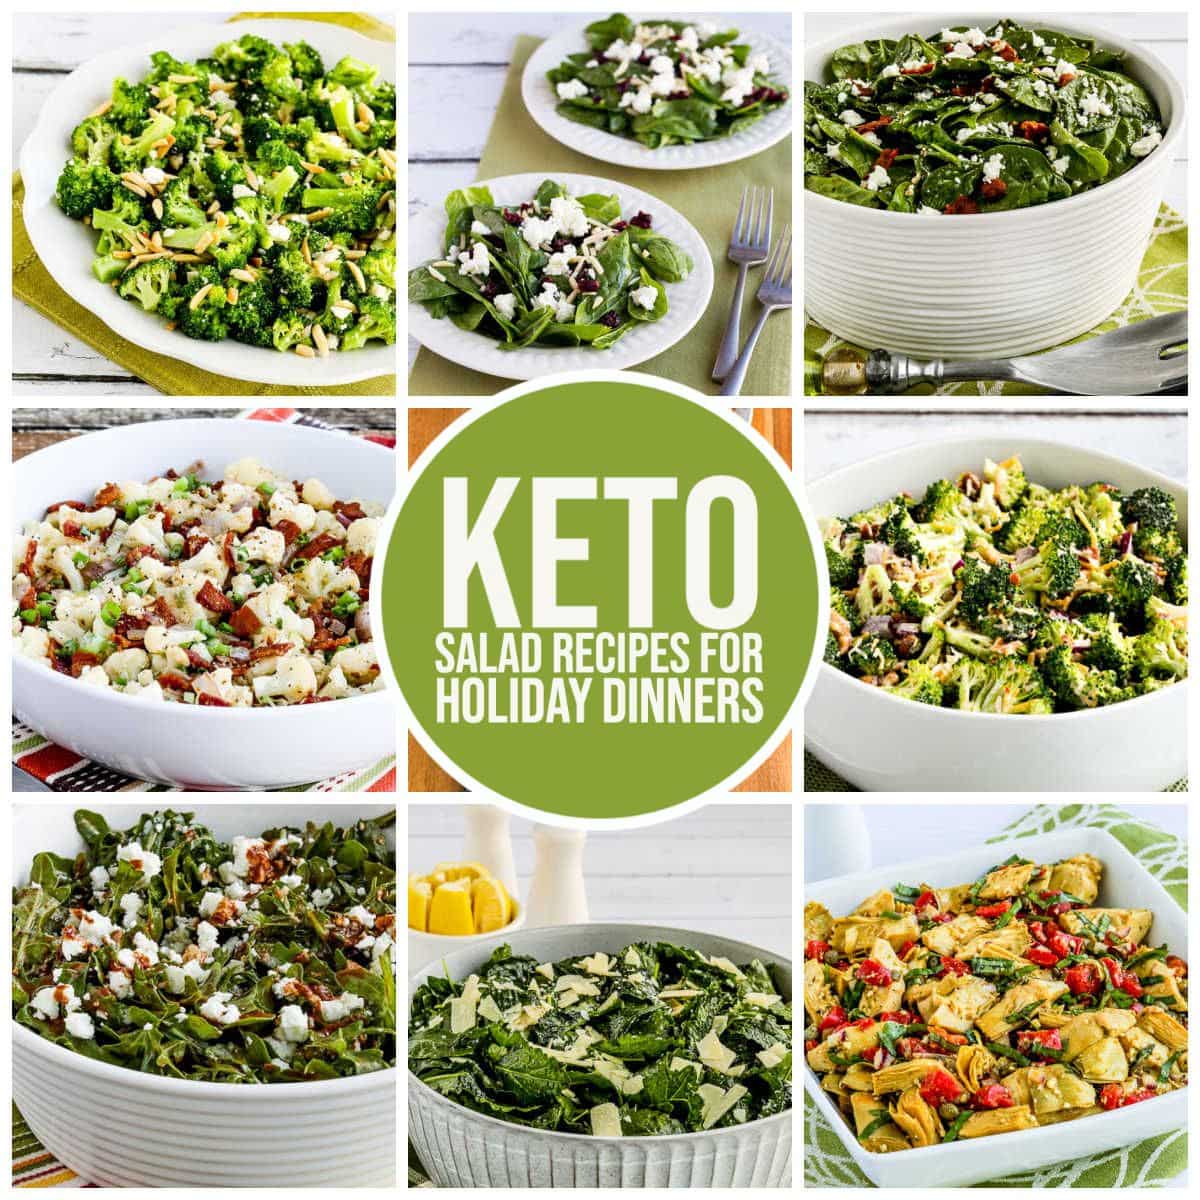 Keto Salad Recipes for Holiday Dinners collage of featured recipesipes for Holiday Dinners collage 2 of featured recipes with text overlay